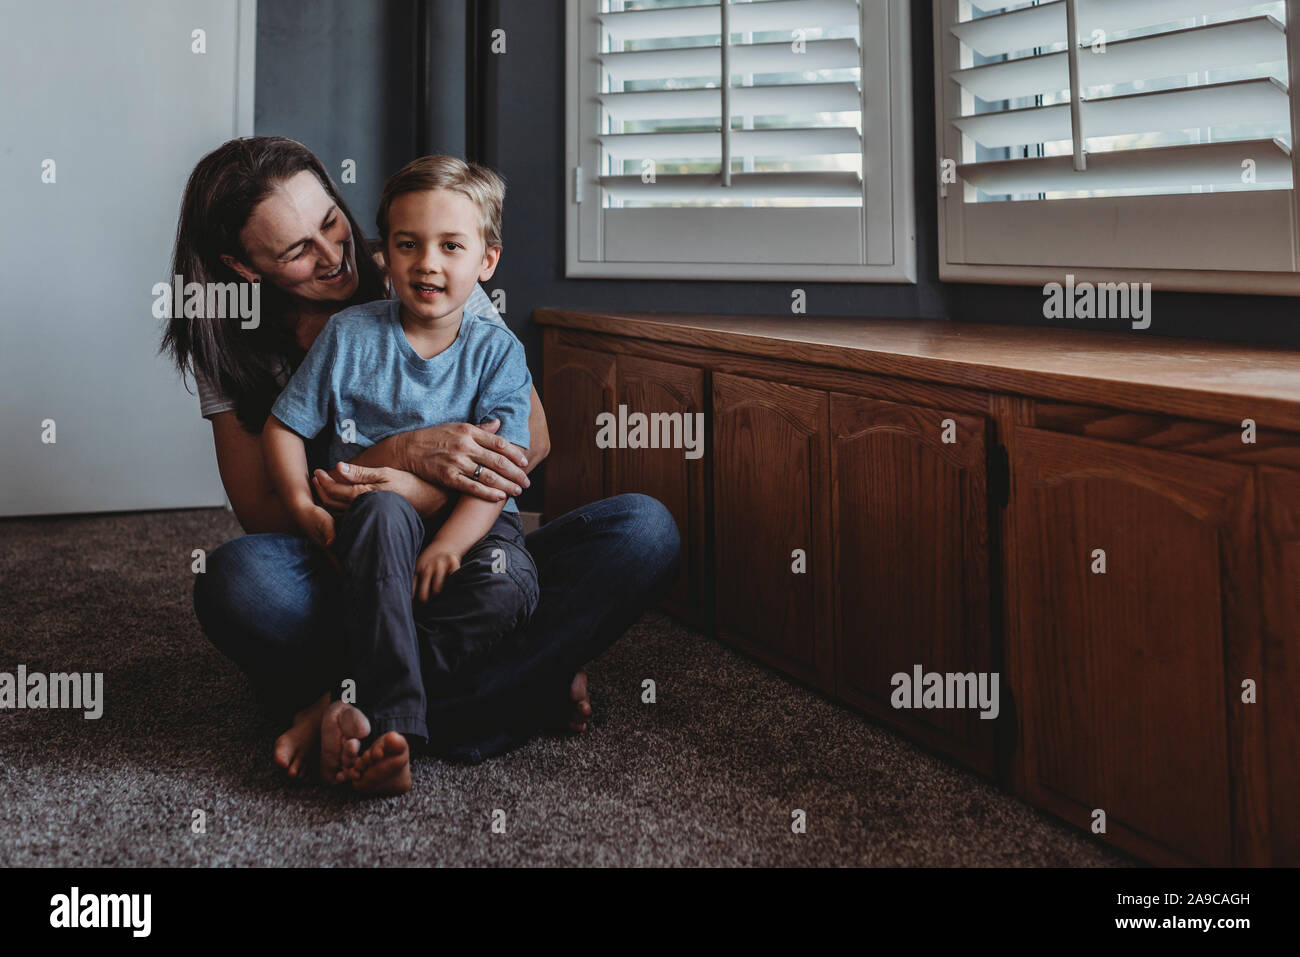 Smiling mom and son sitting on carpeted floor next to window Stock Photo